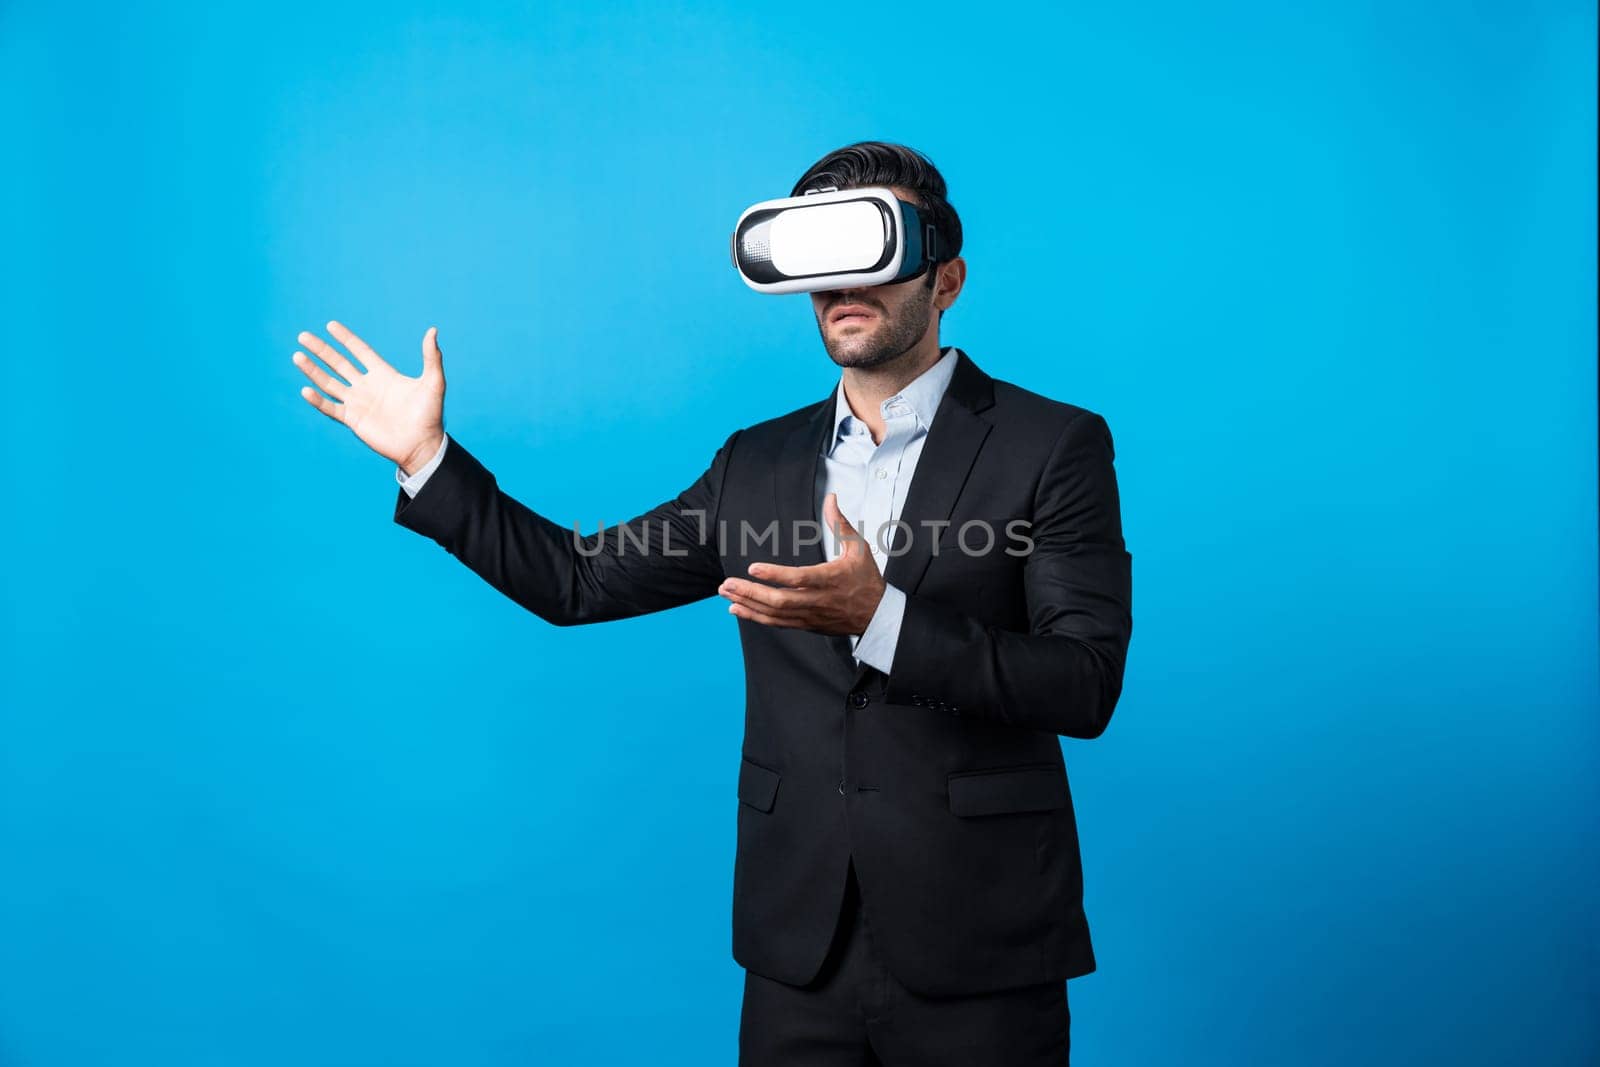 Business man looking data analysis by using VR glasses. Project manager checking business strategy by enter in metaverse or virtual reality world while wearing suit at blue background. Deviation.